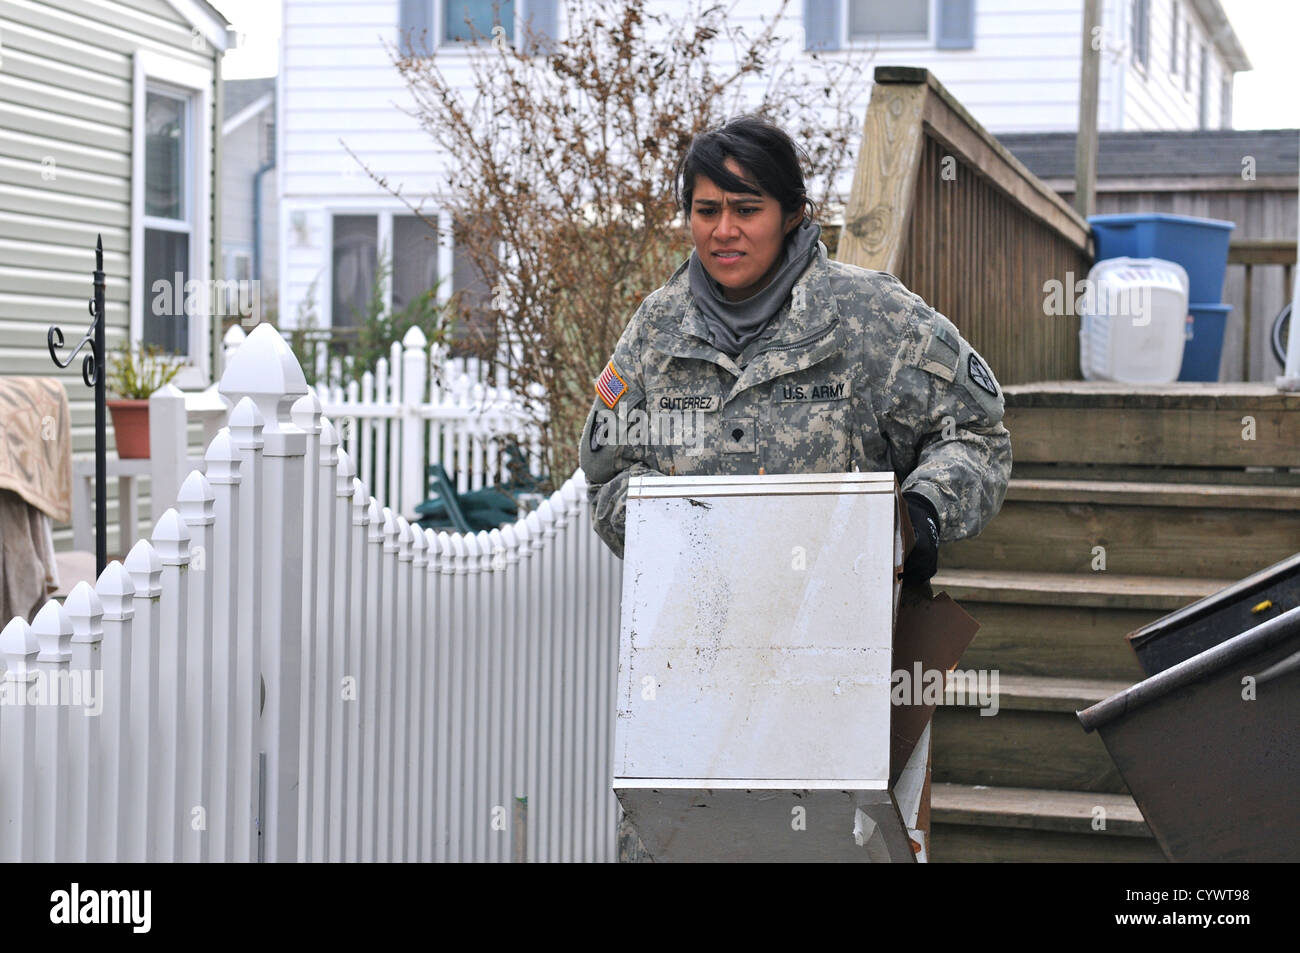 Spc. Maria R. Gutierrez, a preventive medicine specialist from the 227th Preventive Medicine Detachment, 56th Multifunctional Medical Battalion, 62nd Medical Brigade, out of Joint Base Lewis-McChord, Wash., assists citizens in Breezy Point, N.Y., in remov Stock Photo